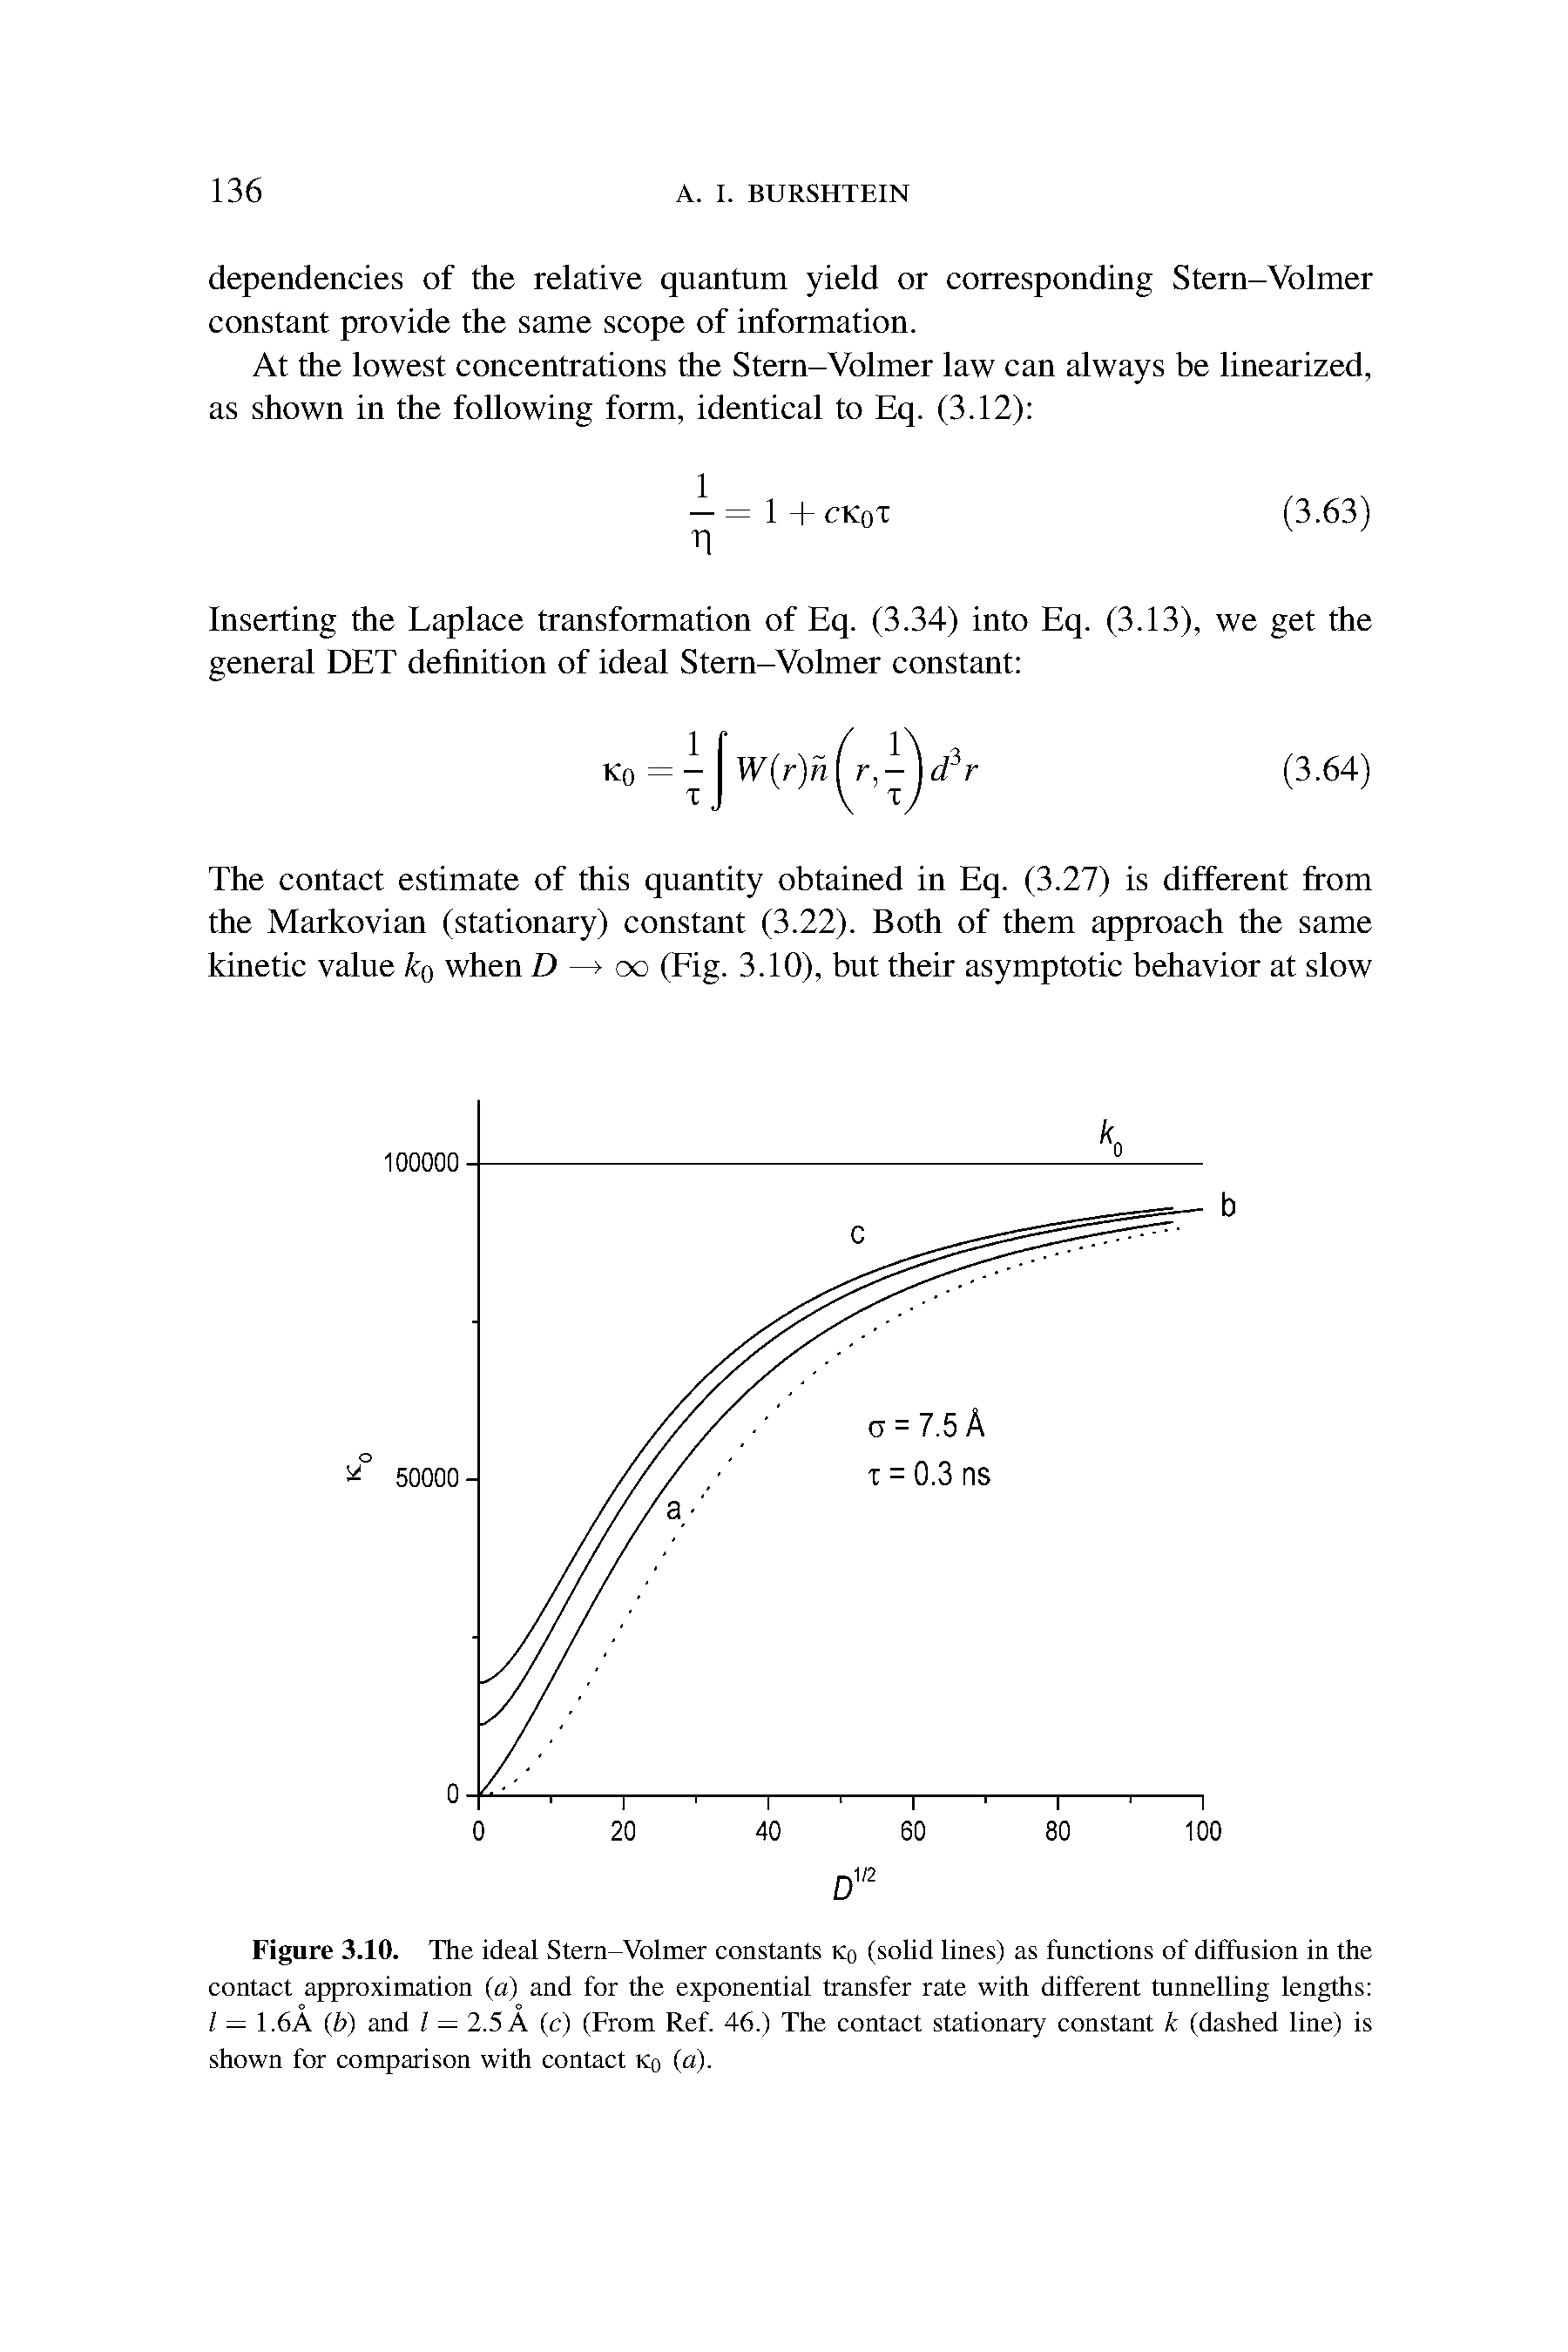 Figure 3.10. The ideal Stern-Volmer constants Ko (solid lines) as functions of diffusion in the contact approximation (a) and for the exponential transfer rate with different tunnelling lengths / = 1.6A (b) and / = 2.5 A (c) (From Ref. 46.) The contact stationary constant k (dashed line) is shown for comparison with contact Kq (a).